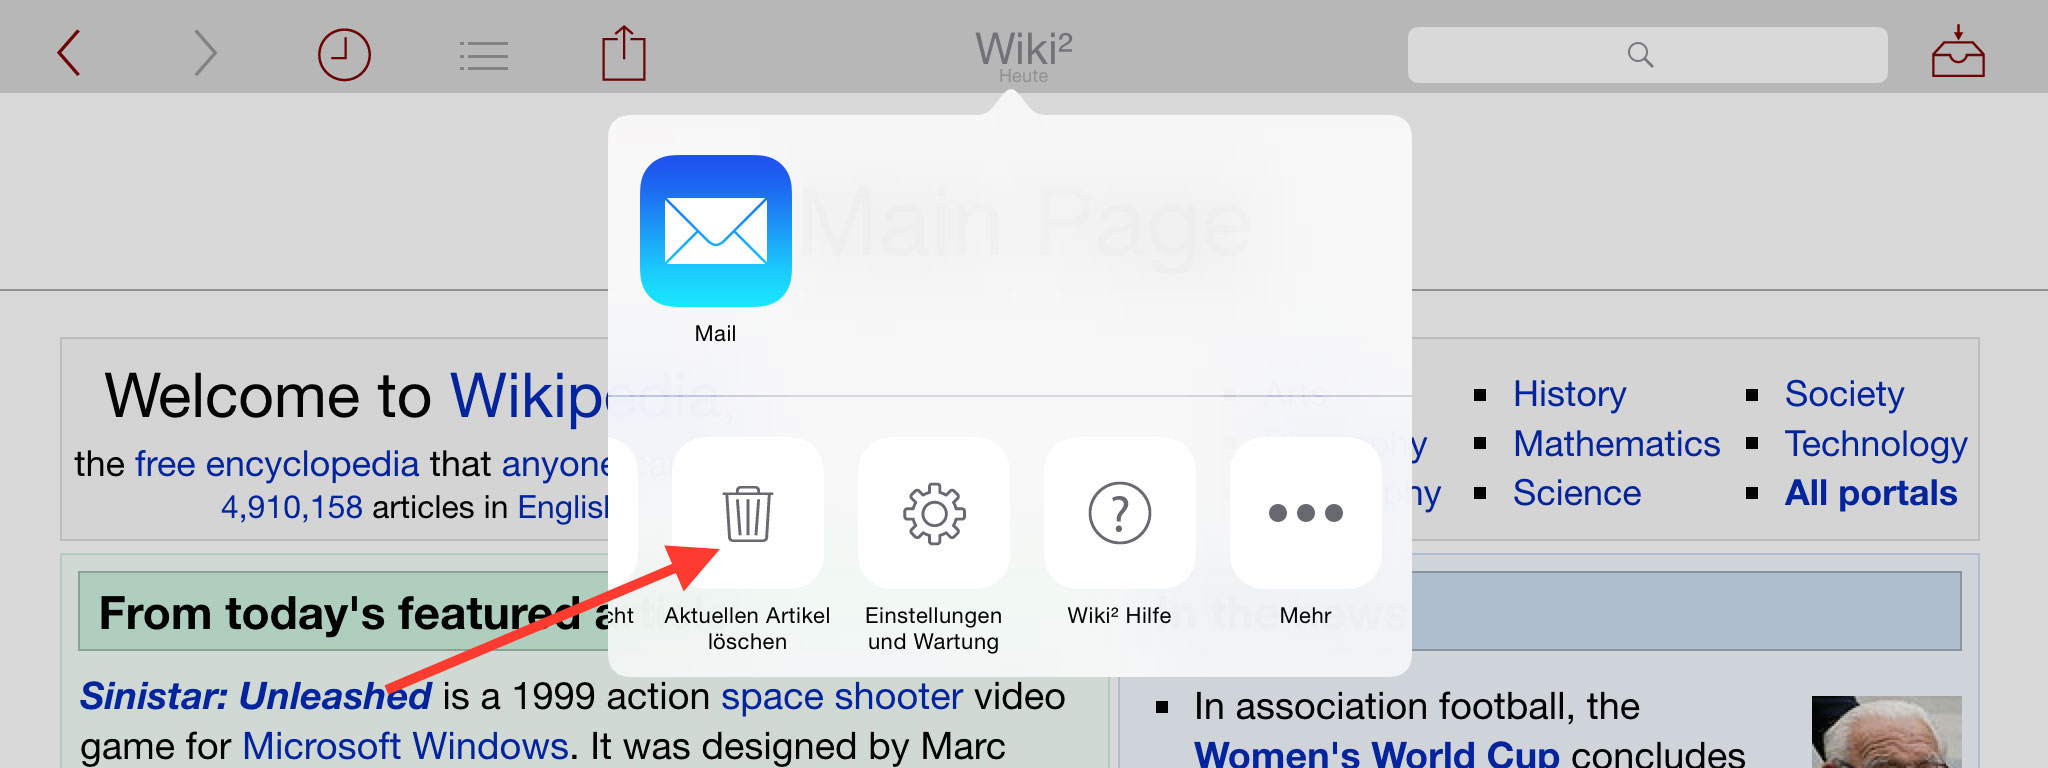 Delete articles from local storage in Wiki² - Wikipedia for iPad